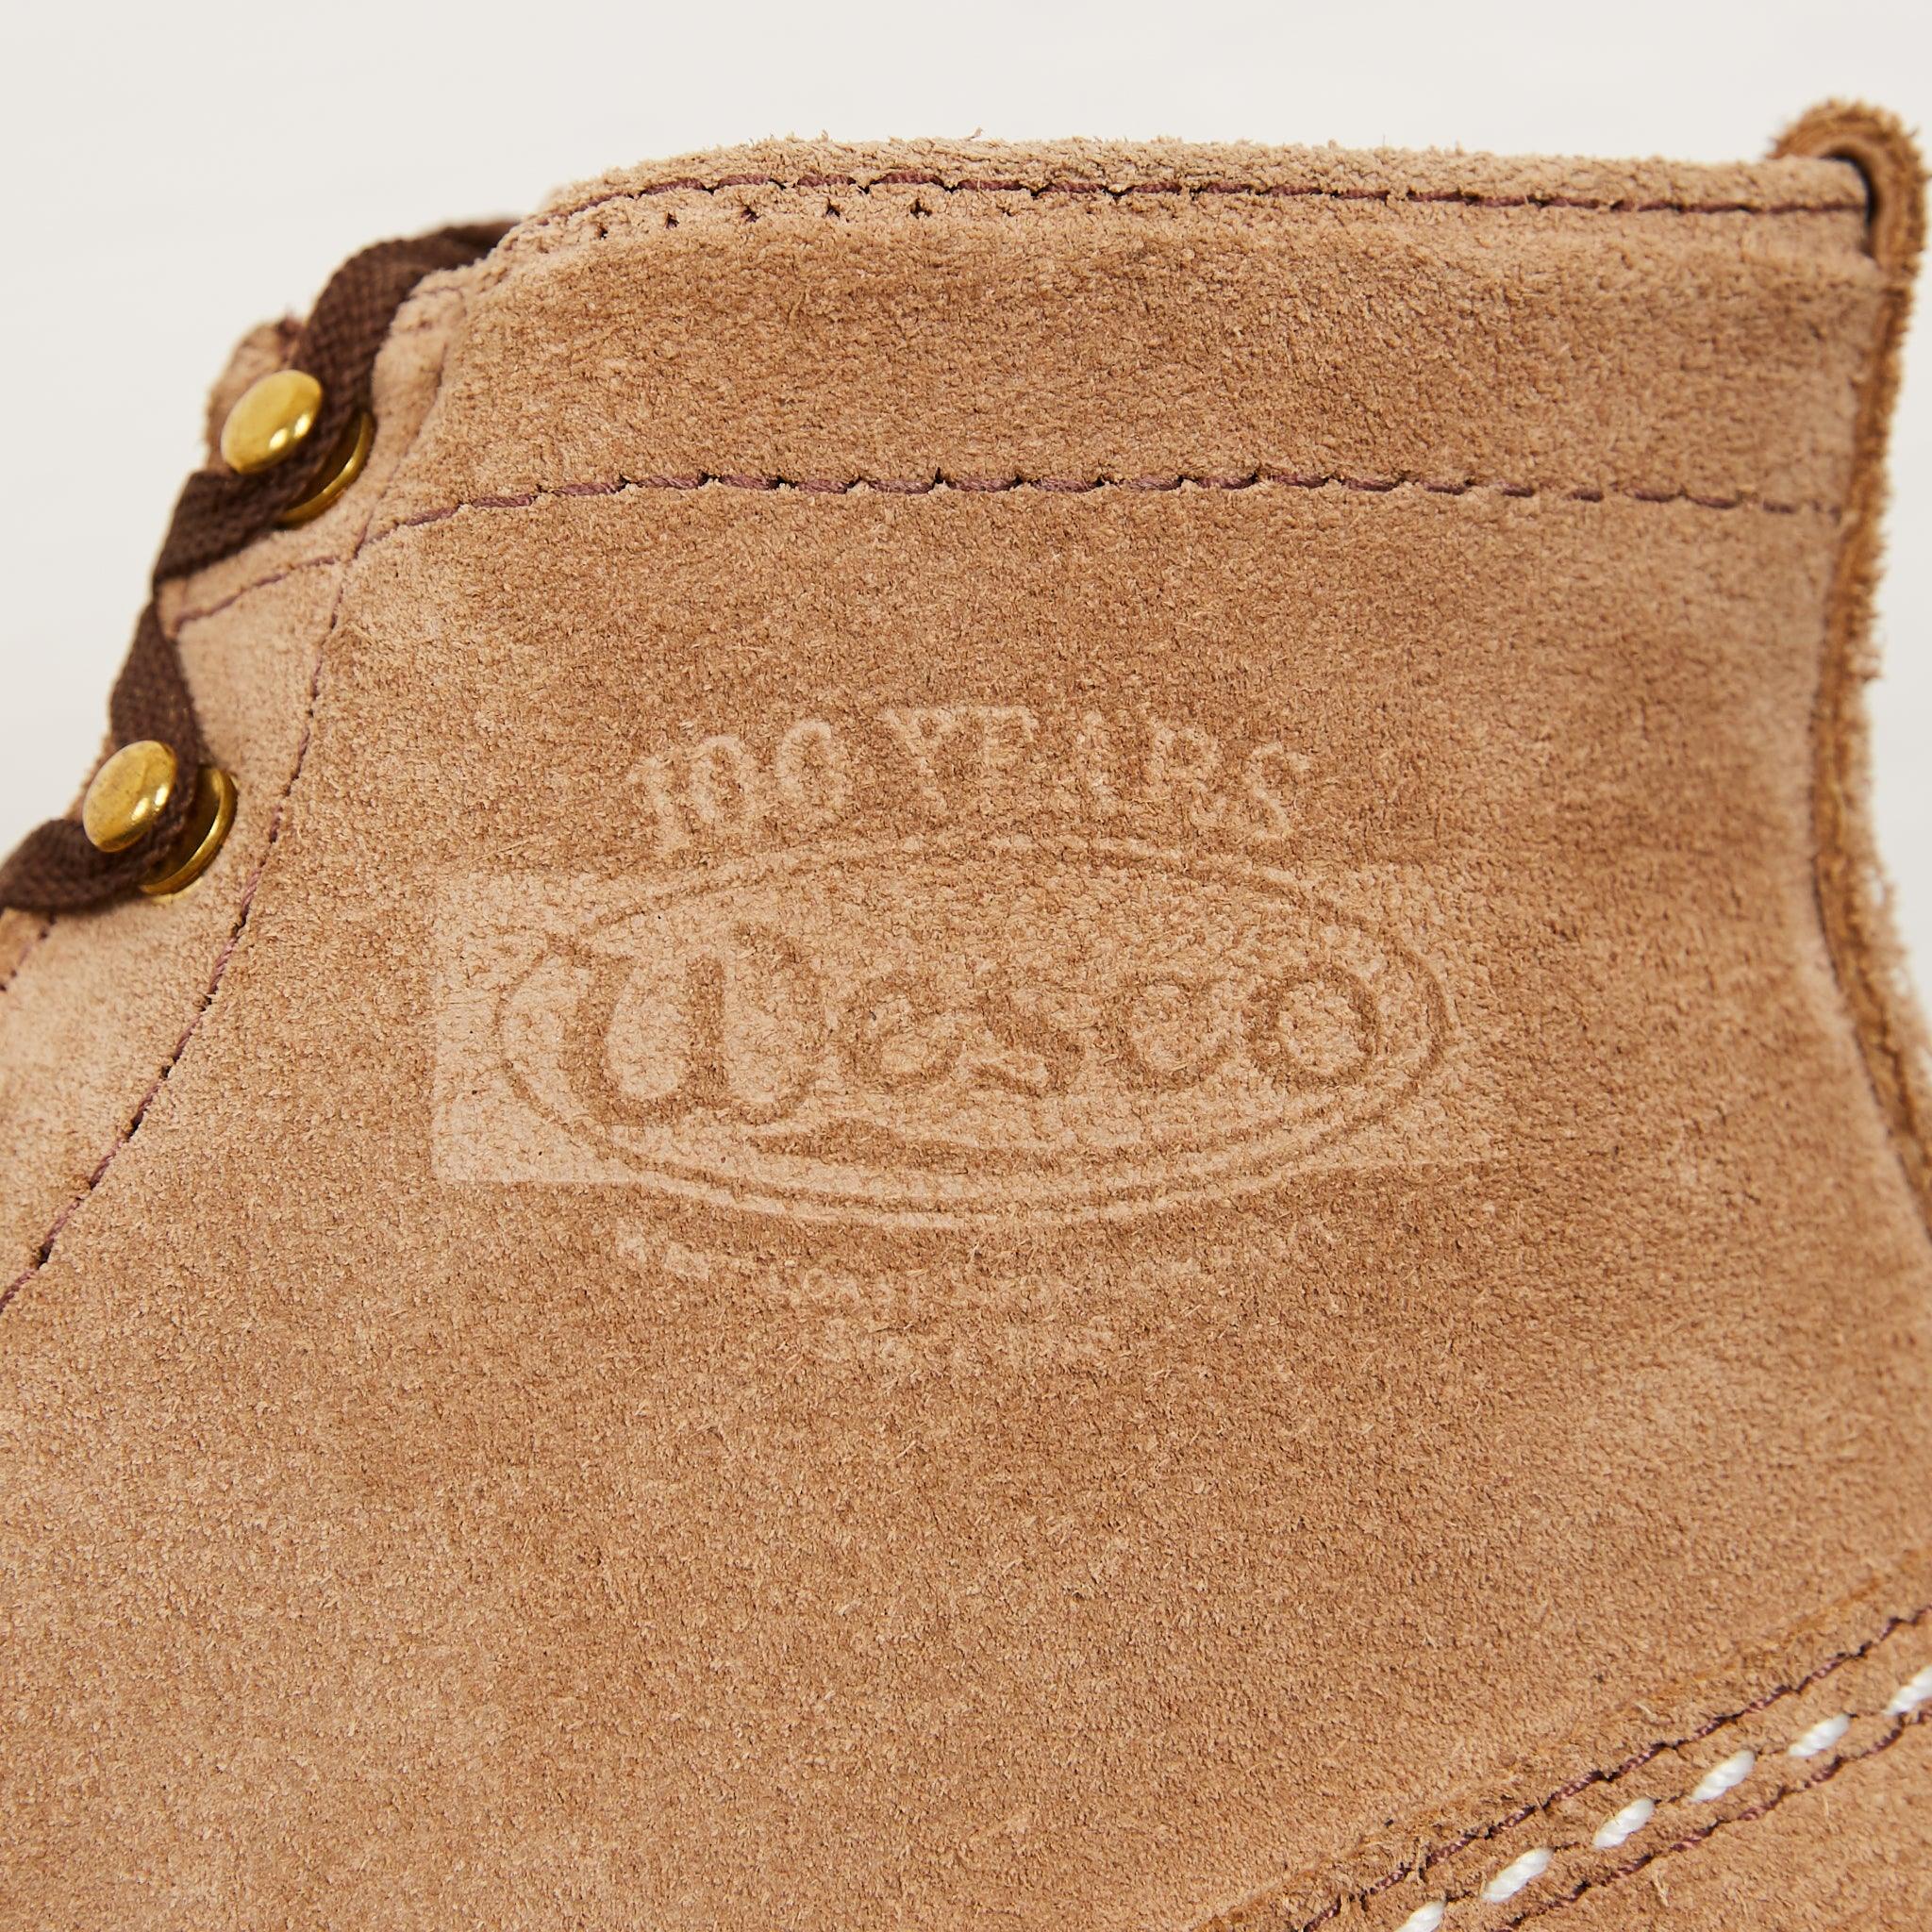 Image showing the WE-BE207269-ROB - Wesco Custom Jobmaster - Roughout Burlap which is a Boots described by the following info Boots, Footwear, Wesco and sold on the IRON HEART GERMANY online store